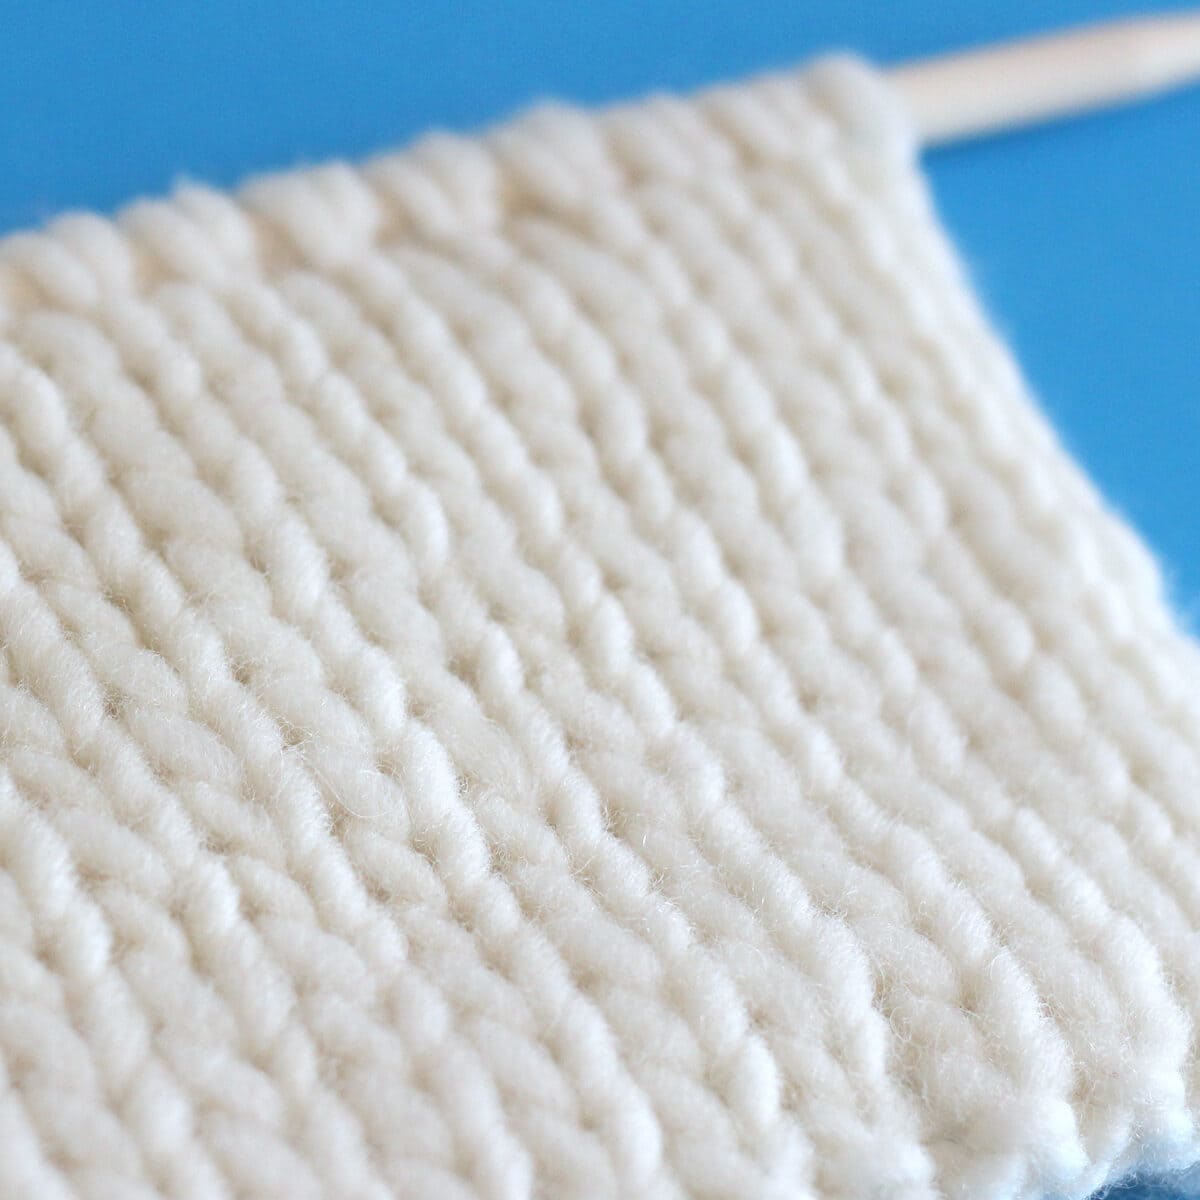 Close up of the side of the Double Stockinette stitch on straight knitting needles in white yarn.